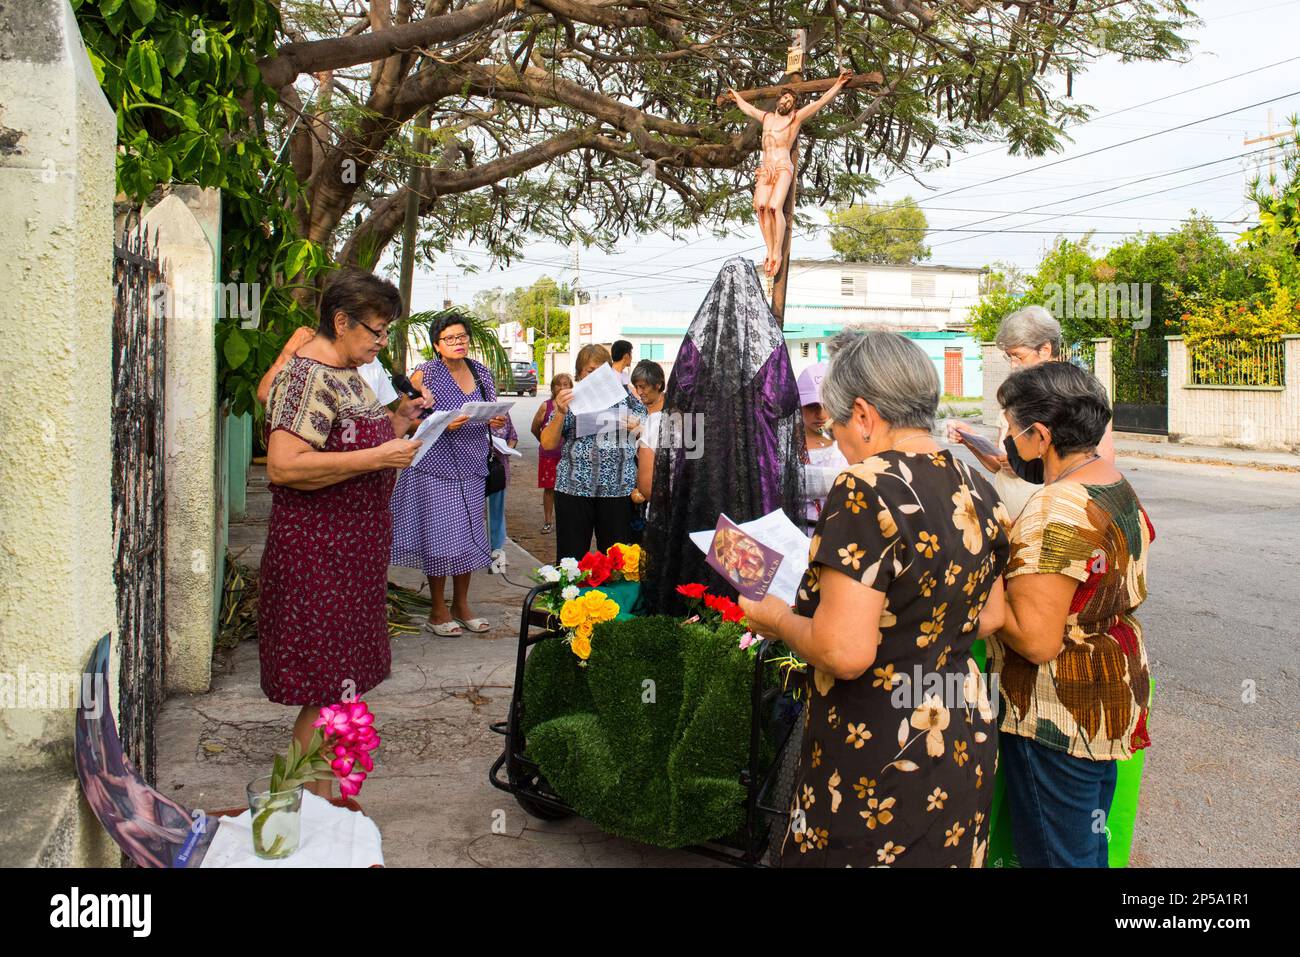 To mark the seventh friday of Lent, small homme altars are set up in some of the more traditional neighborhoods of Merida, Mexico. They are here to  commemorate the suffering of the Virgin Mary. Parishioners go from house to house with a statue of the Virgin Mary and a cross with Jesus, they pray and sing religious cantics for the occasion Stock Photo